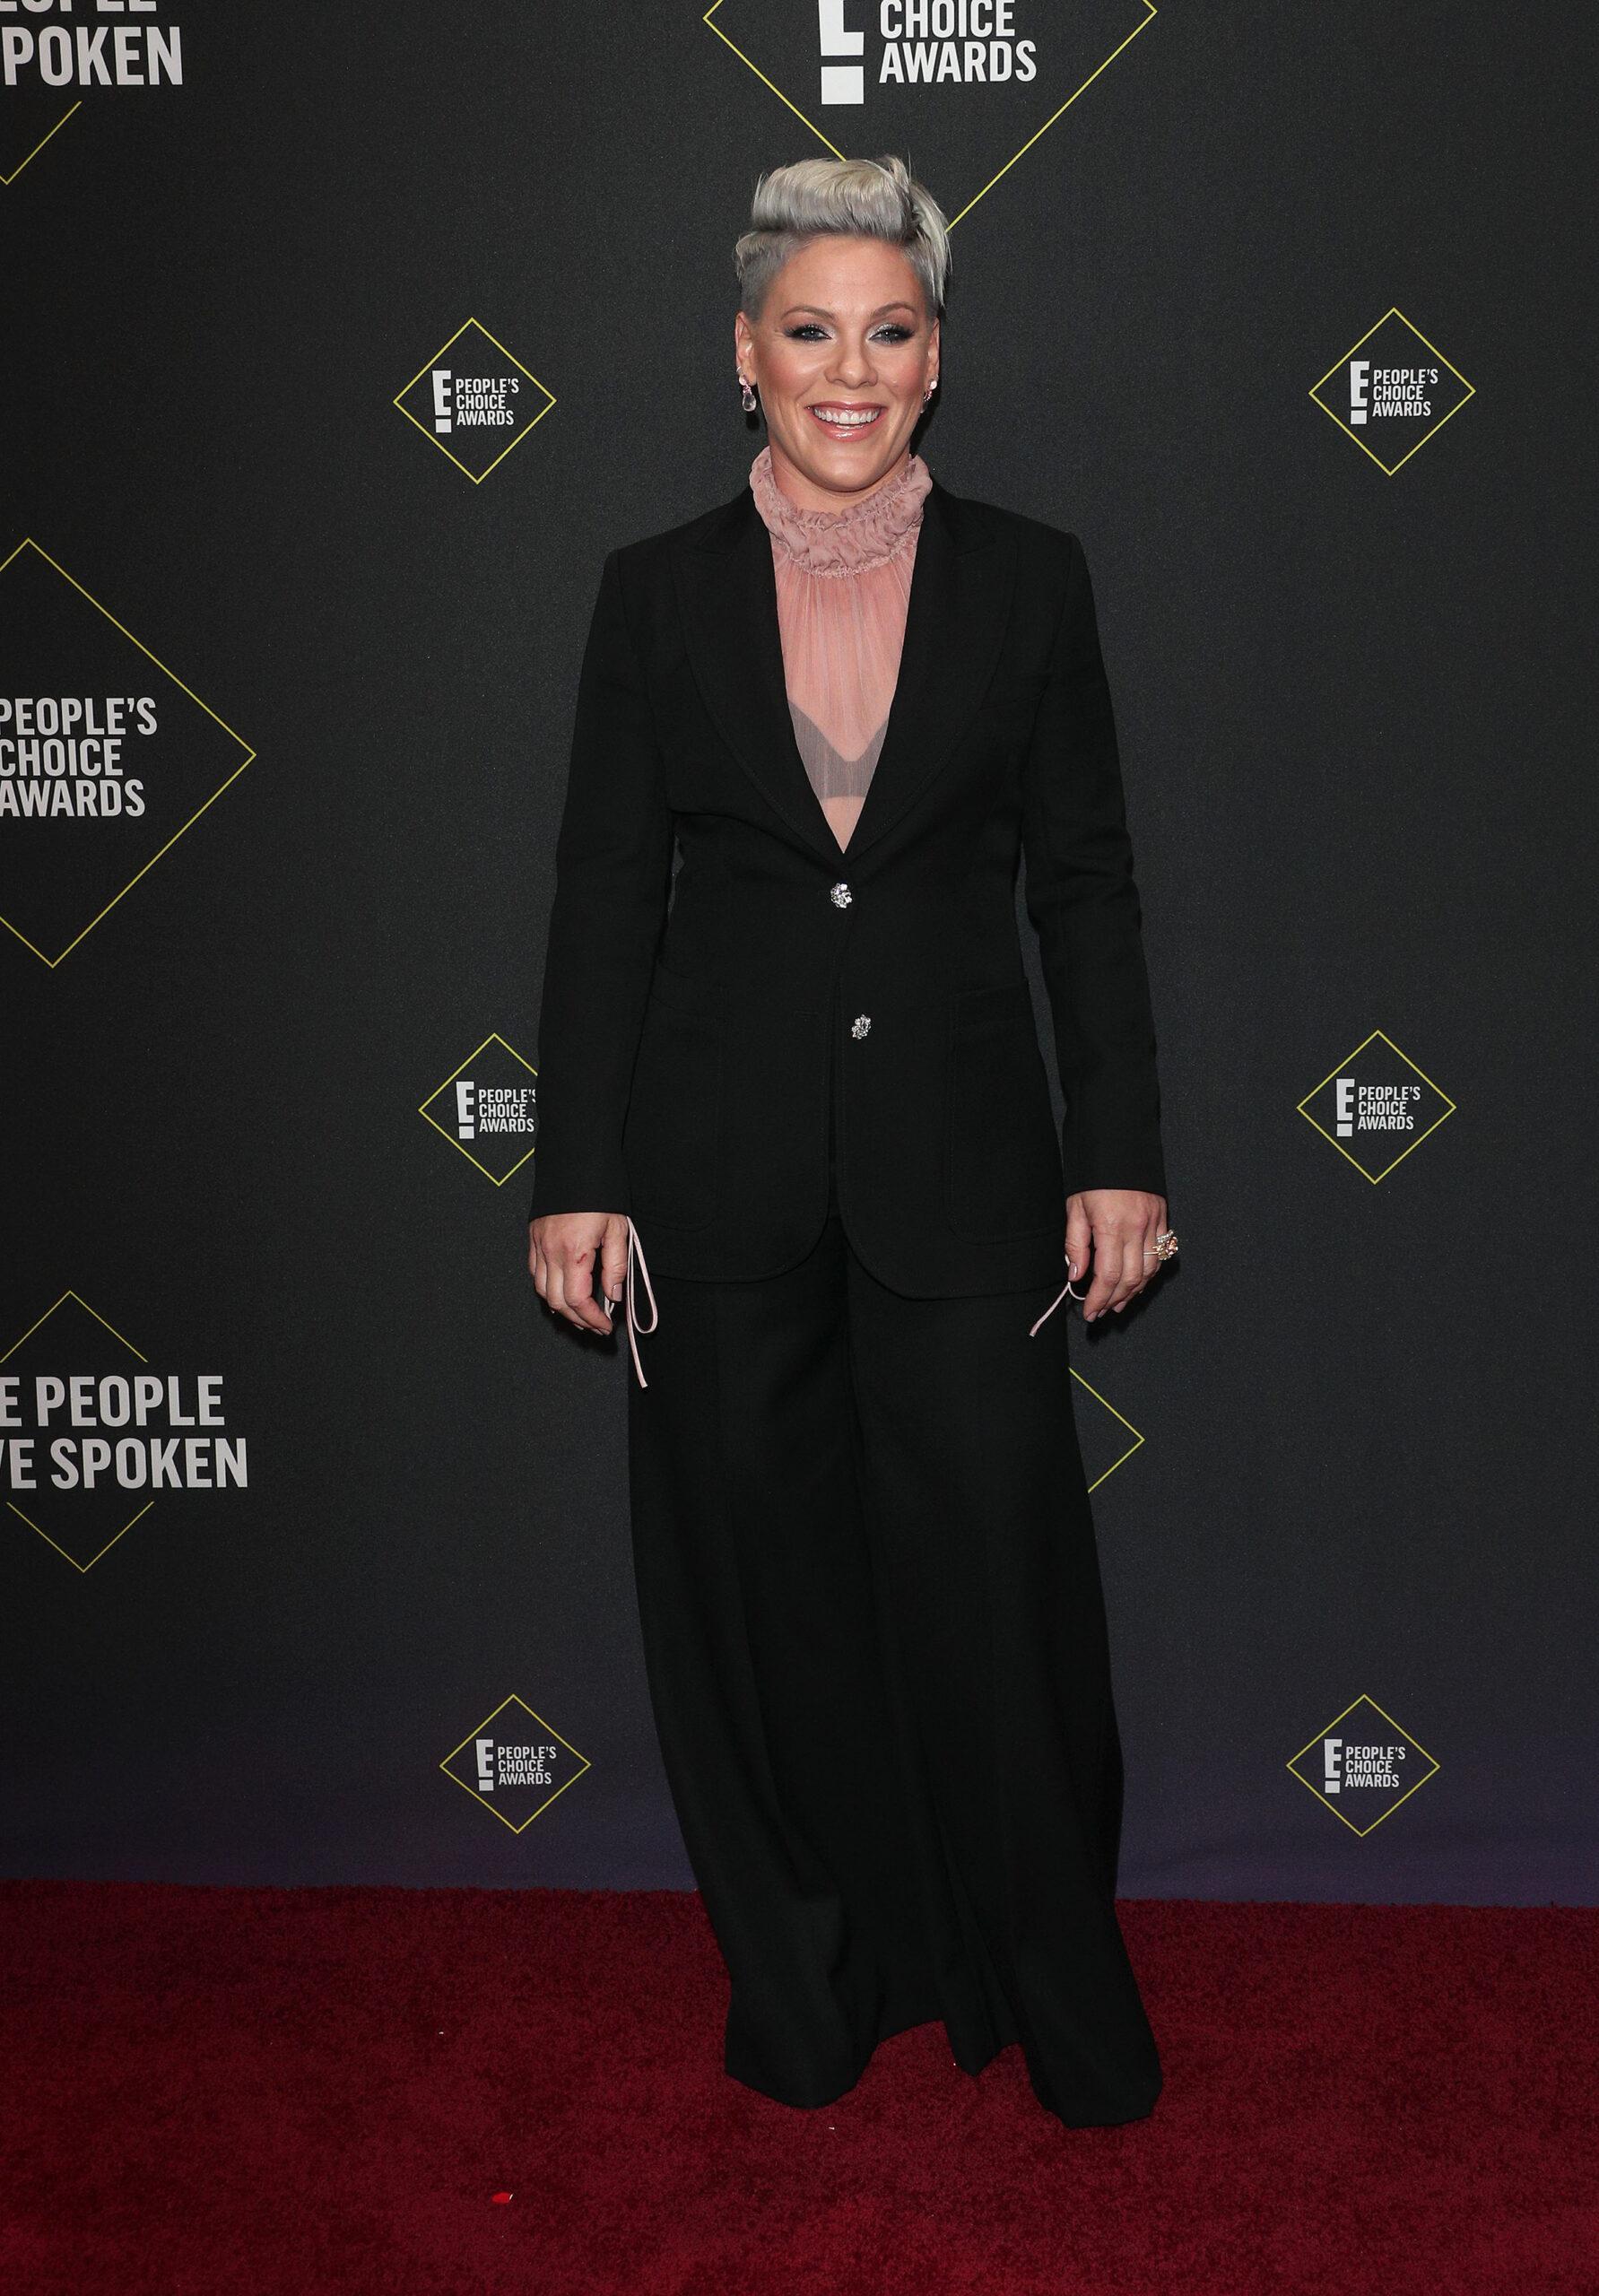 Singer Pink at the 45th Annual Peoples Choice Awards In Los Angeles